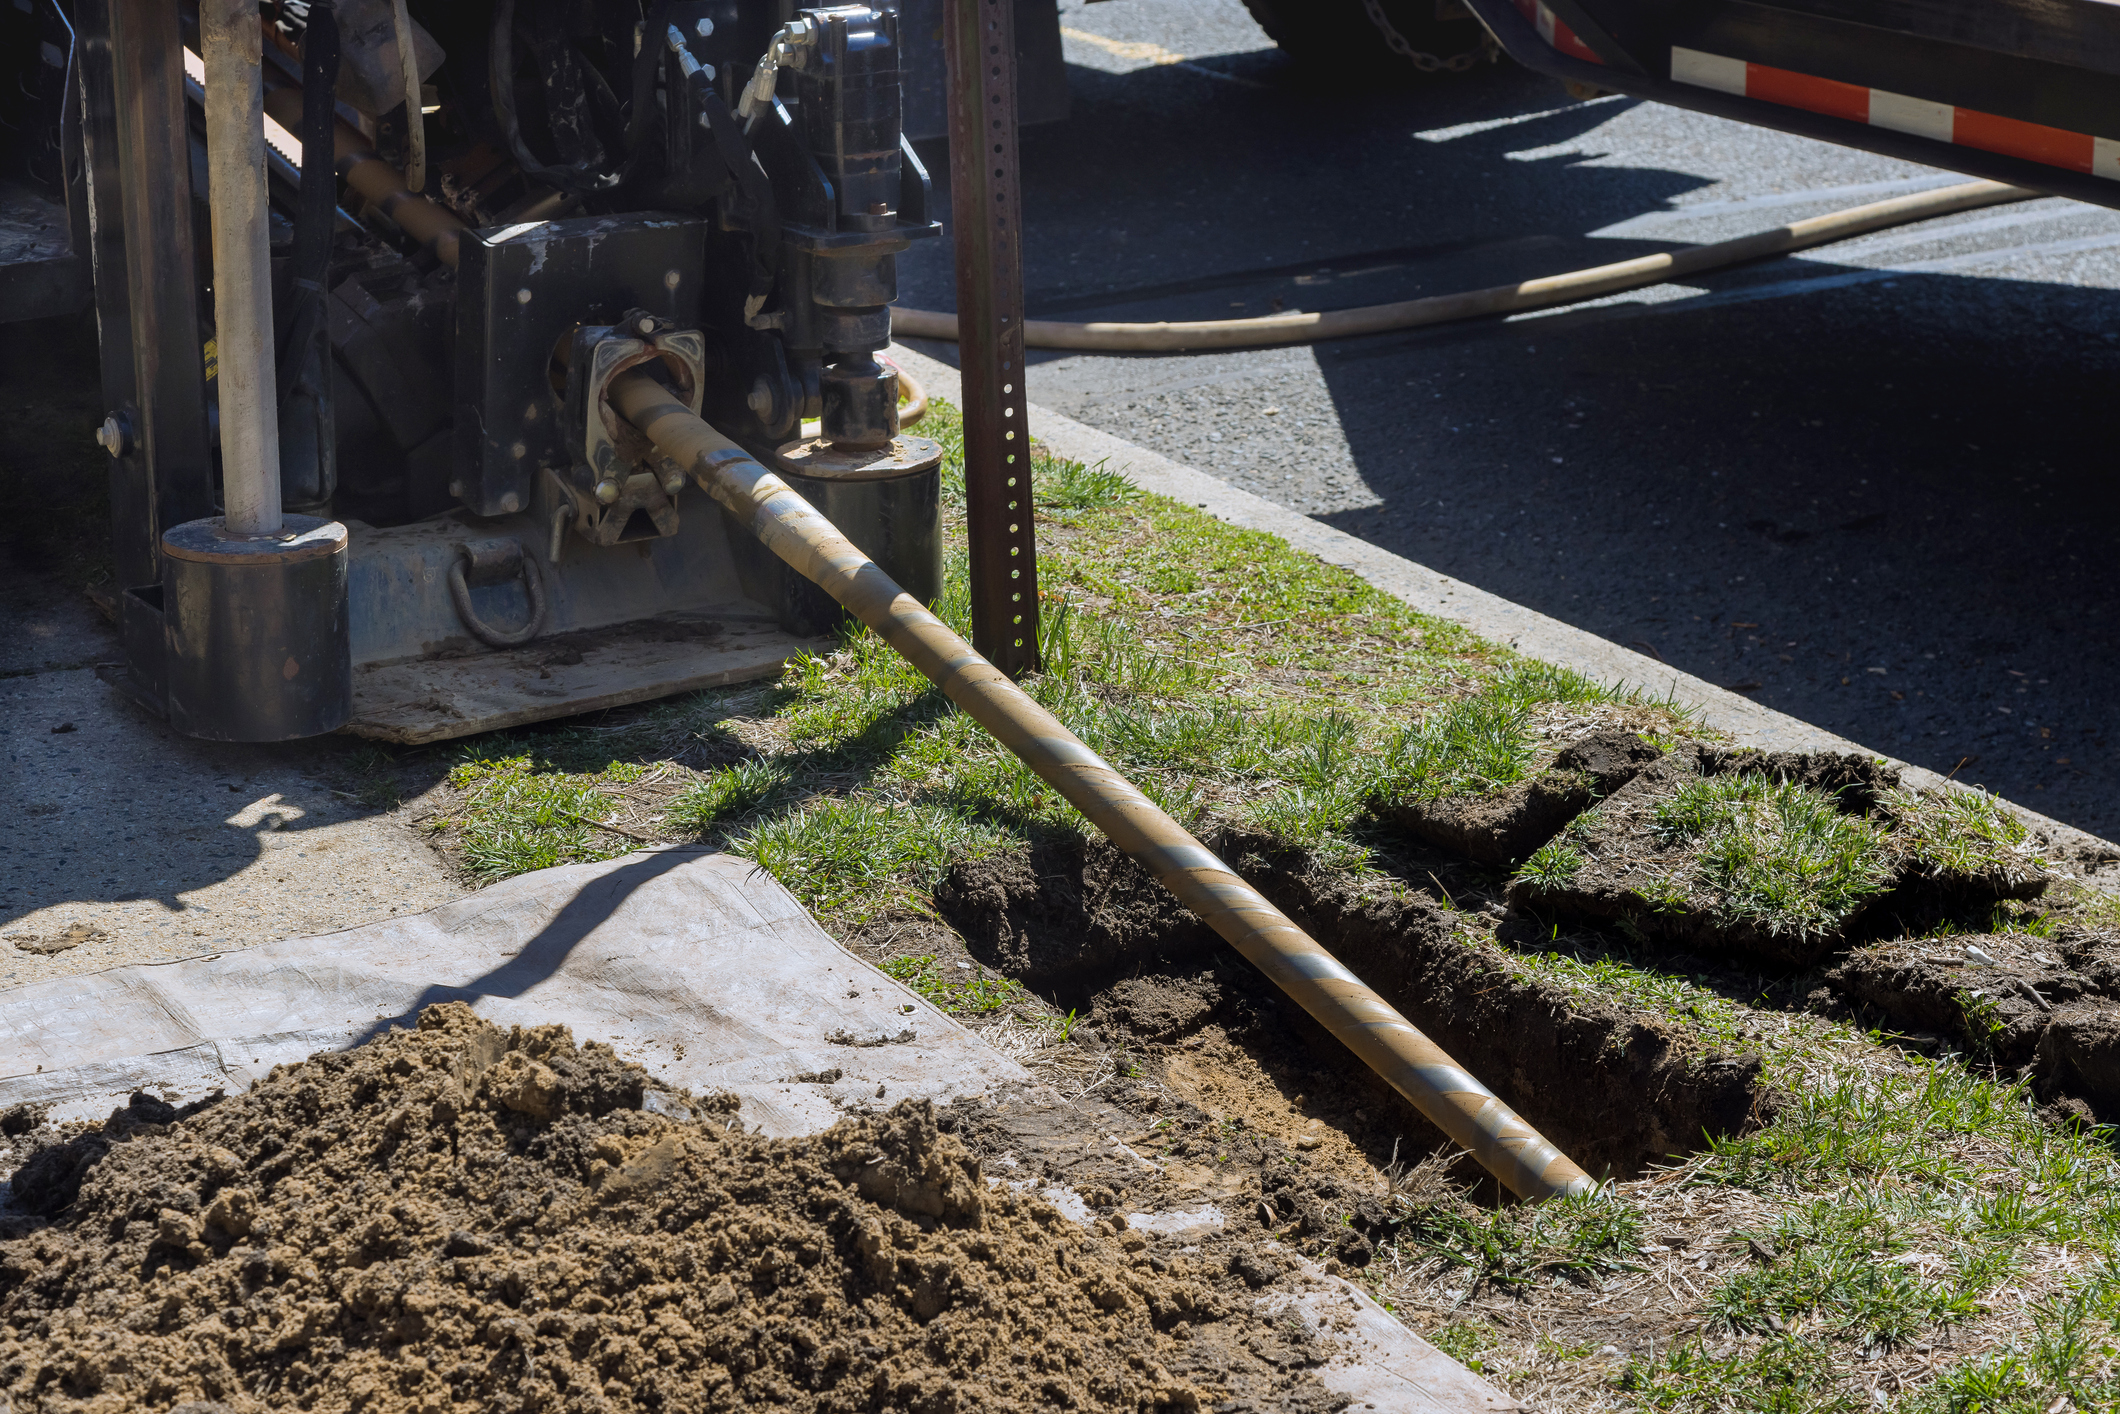 Trenchless sewer line repair being conducted outside.